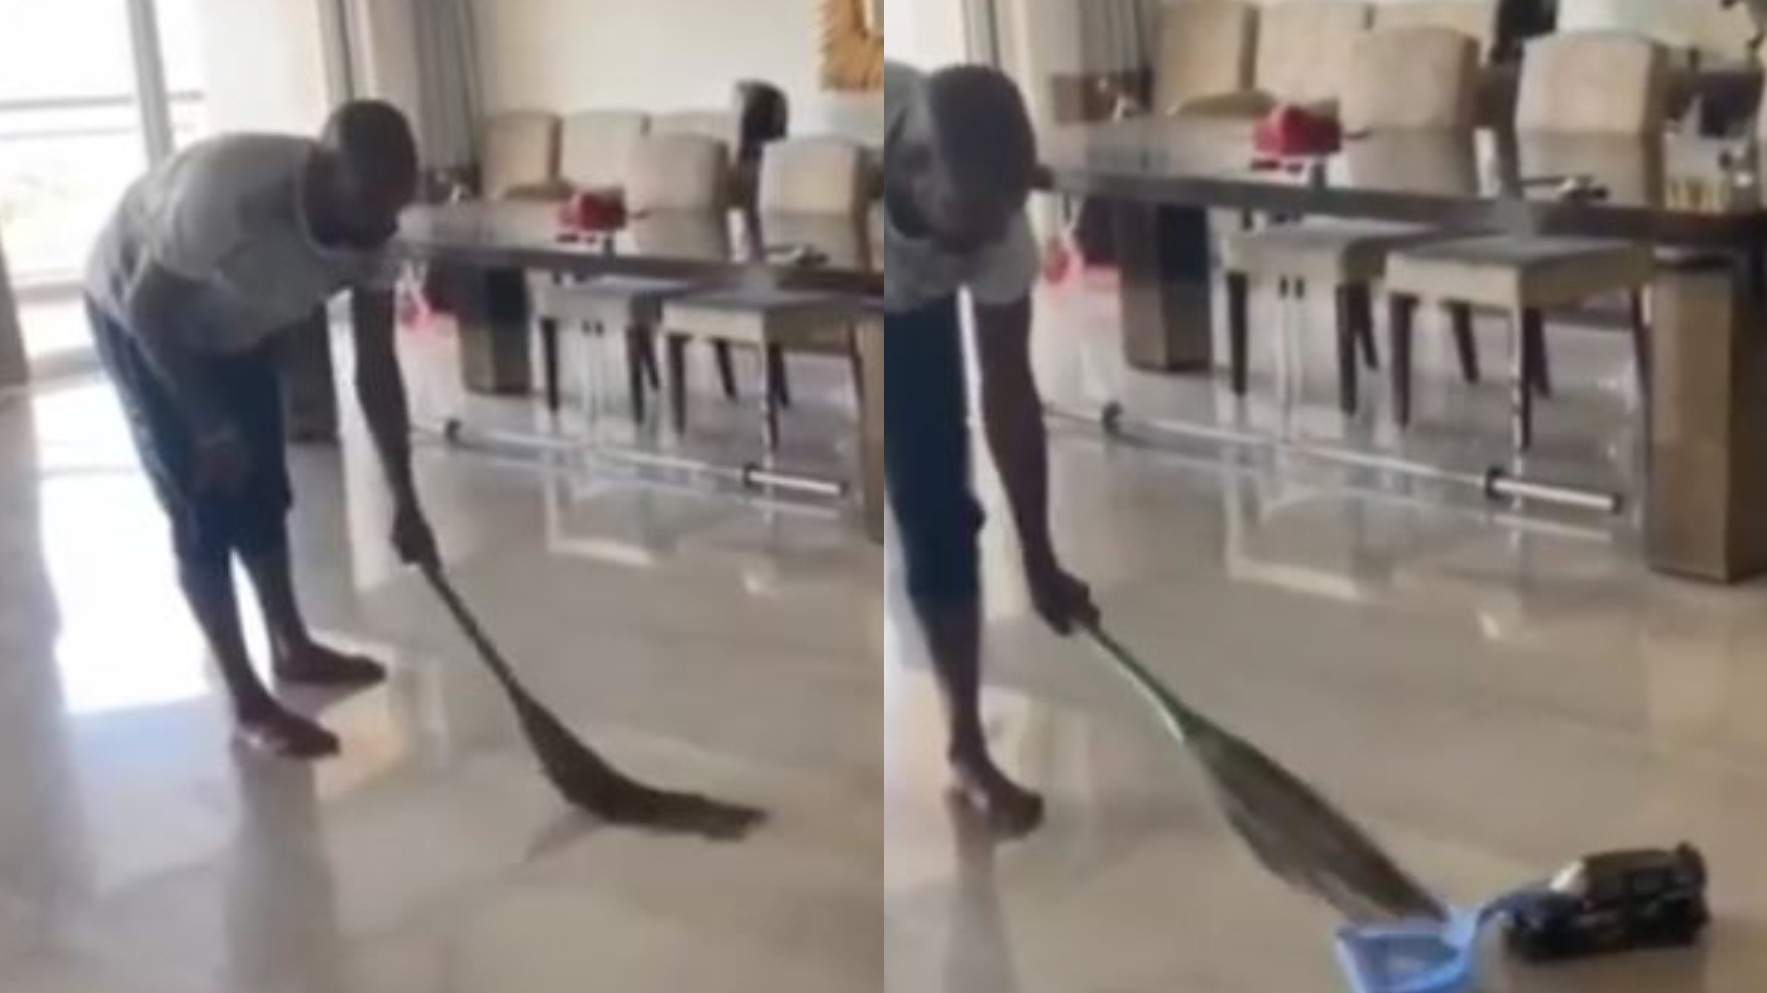 WATCH- Shikhar Dhawan's son Zoravar shows who's the boss while cleaning the house